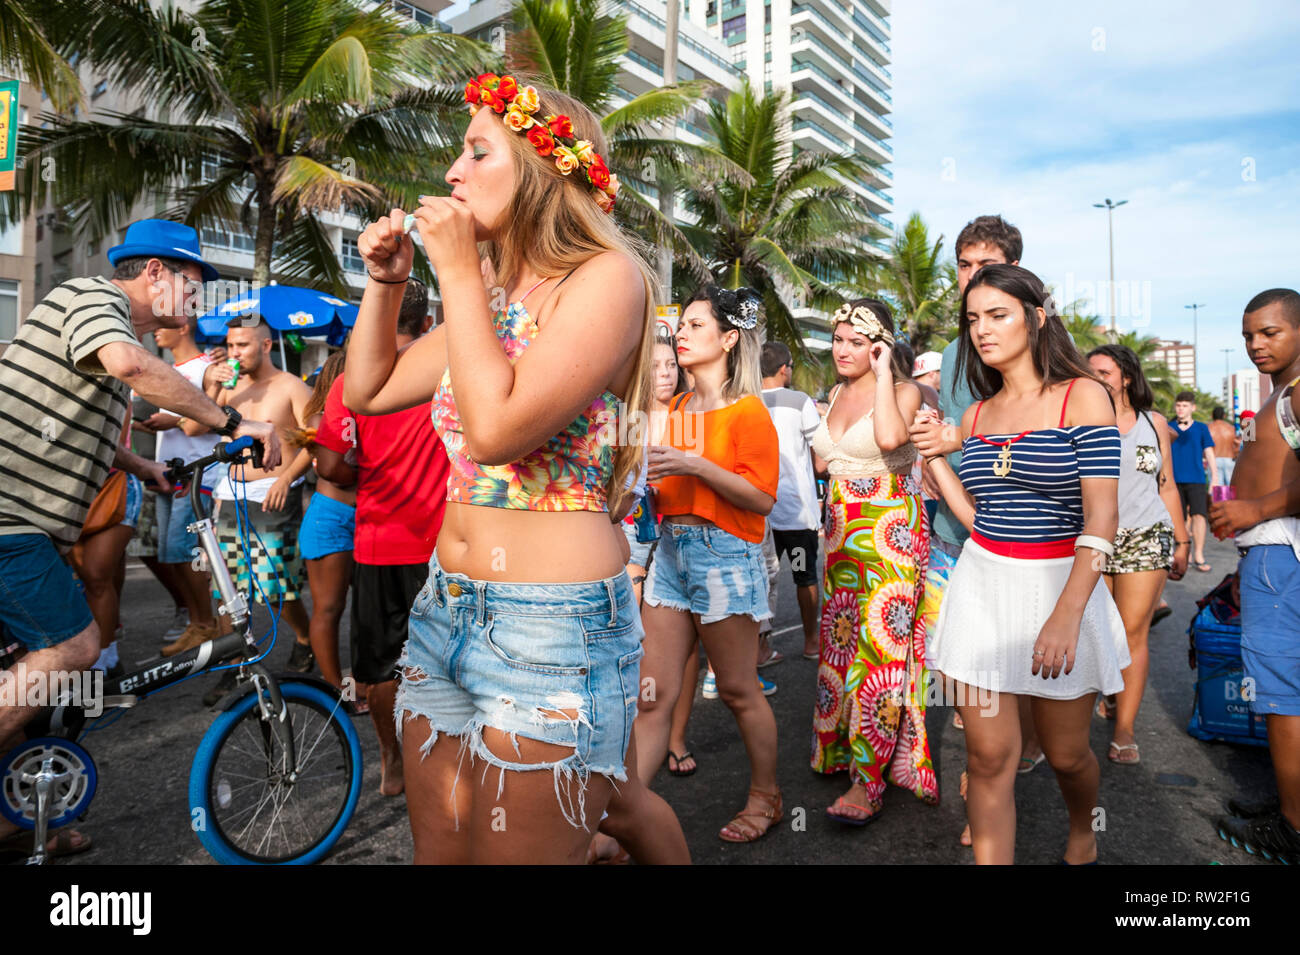 RIO DE JANEIRO - JANUARY 30, 2016: An afternoon banda street party in Ipanema draws crowds of young Brazilians during the city's Carnival celebrations Stock Photo